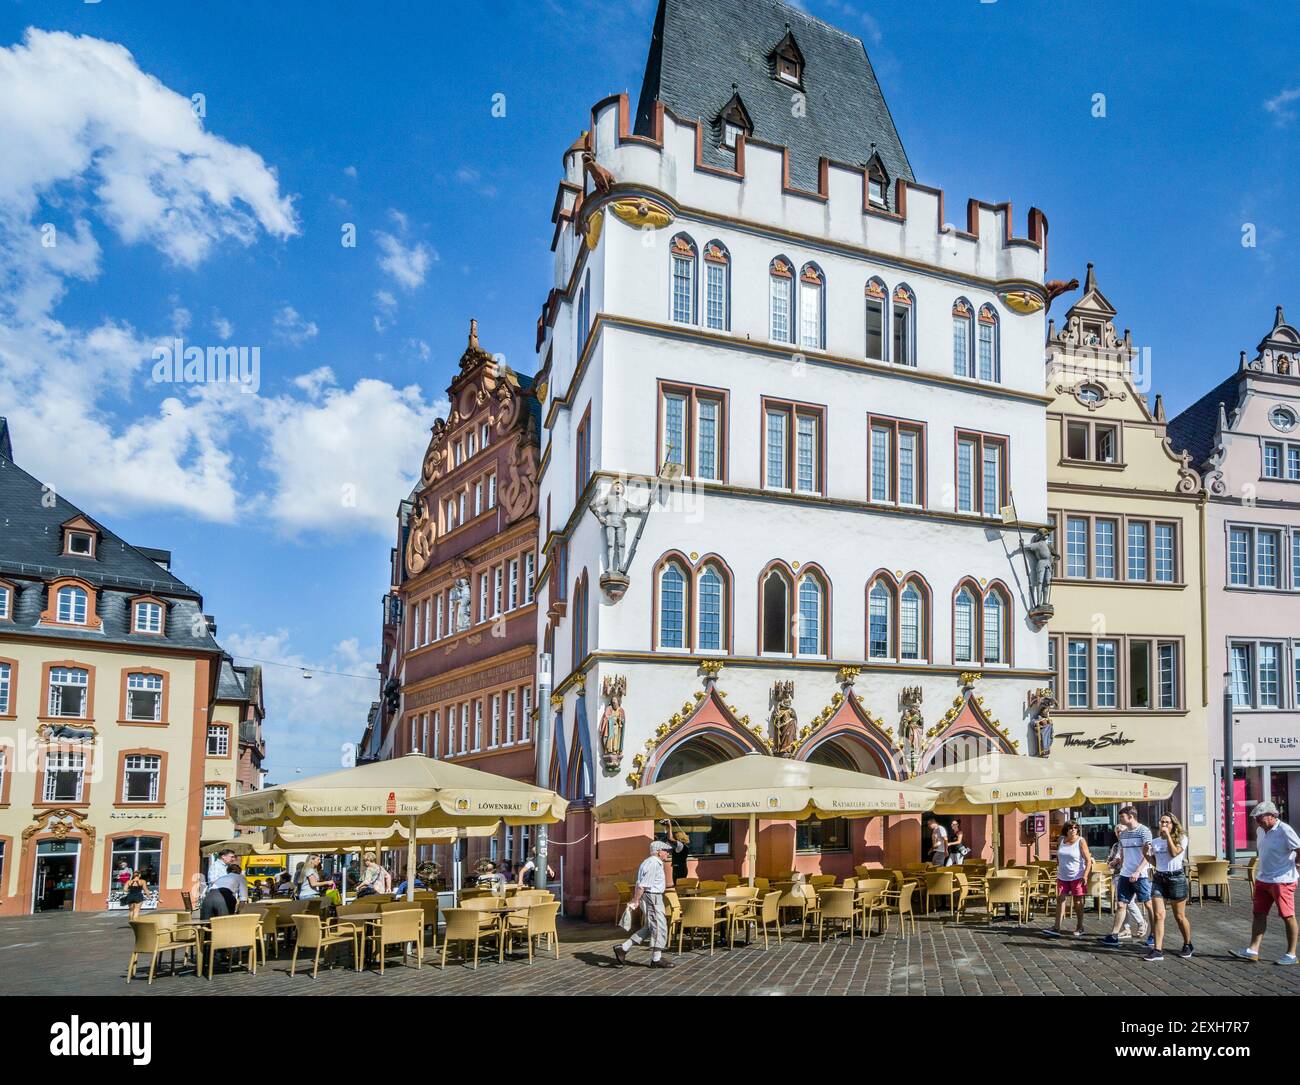 the 'Steipe', historic building housing the Ratskeller Restaurant at Hauptmarkt, the main market square of the ancient city of Trier, Rhineland-Palati Stock Photo